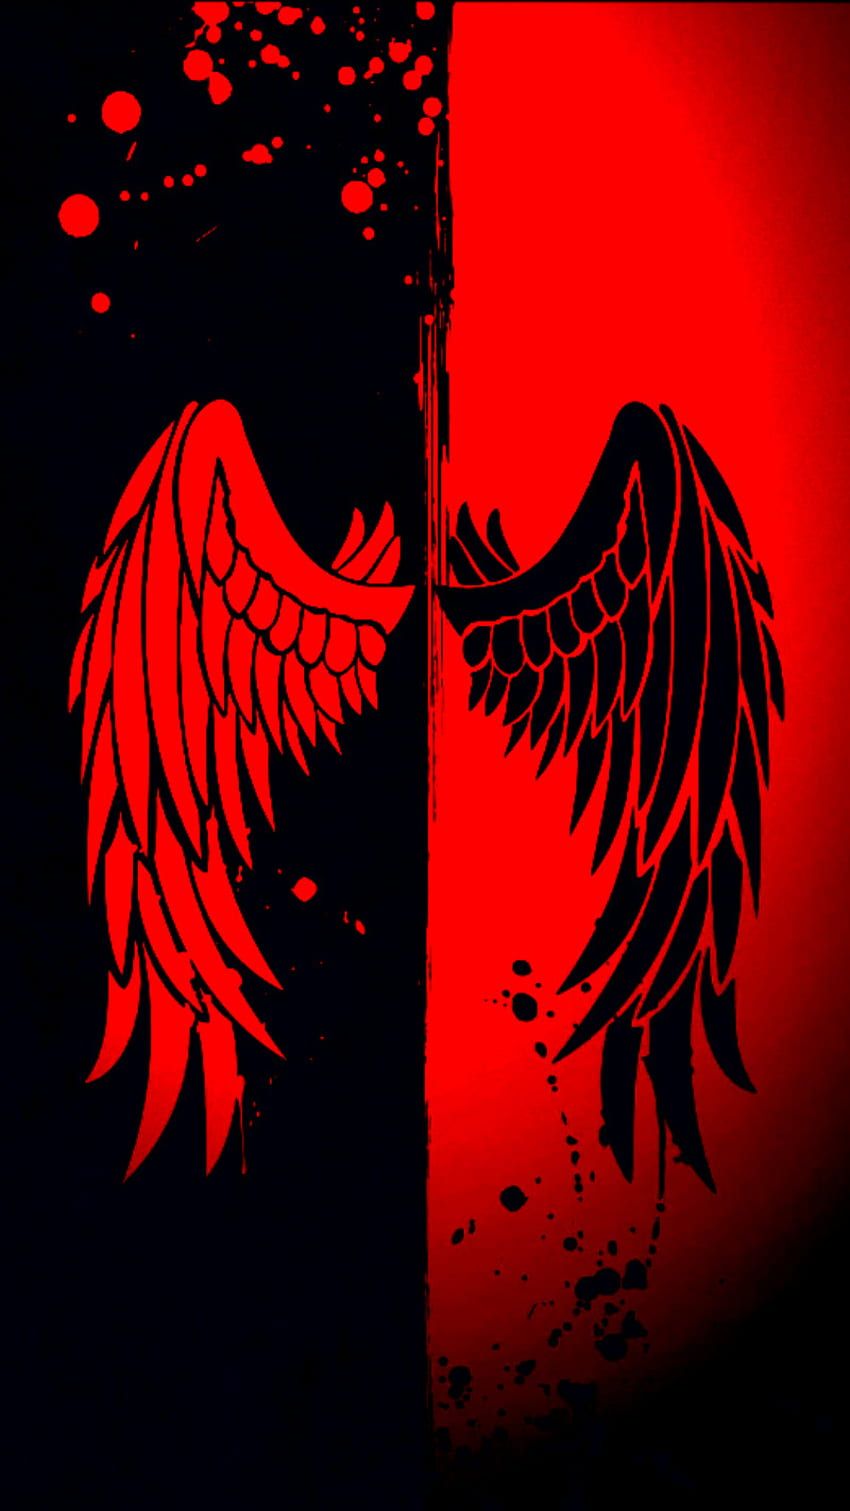 A stylized image shows a pair of large, red wings on the left side and a pair of black wings on the right side. Both sets of wings appear to be positioned towards the bottom of a dark background, with a contrasting  - Wings